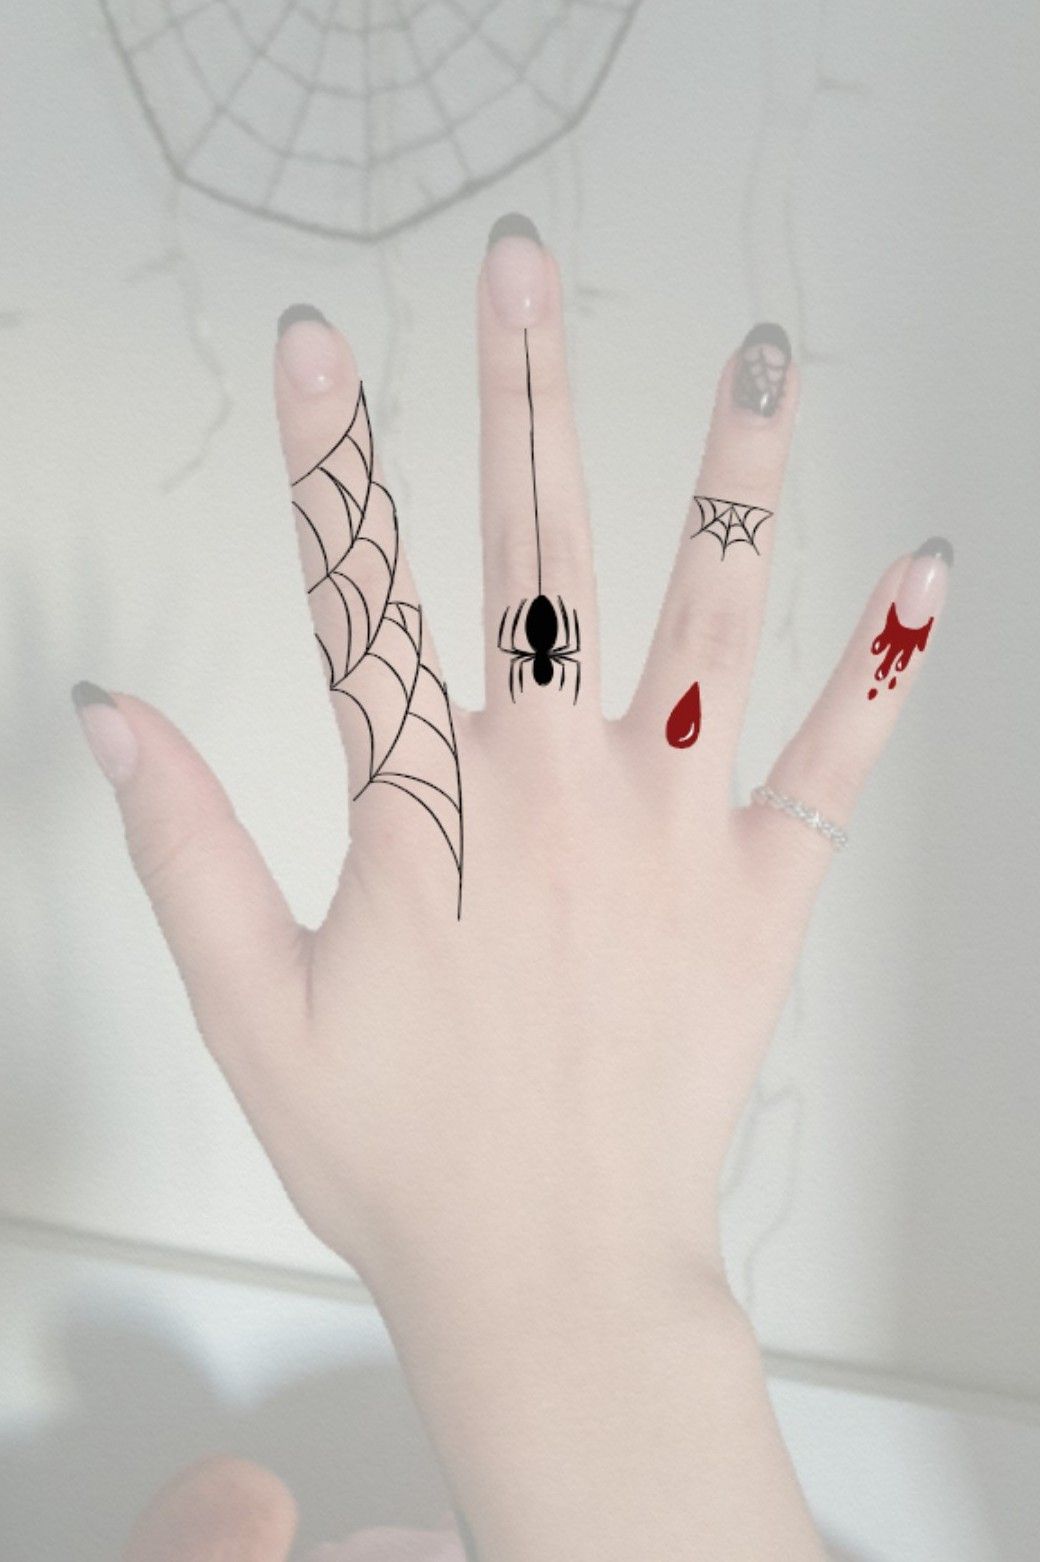 Tattoo uploaded by minerva  Cute Haunted Finger Tattoos by Allangraves  Allangraves Halloween Halloweentattoo Fingertattoos  Tattoodo